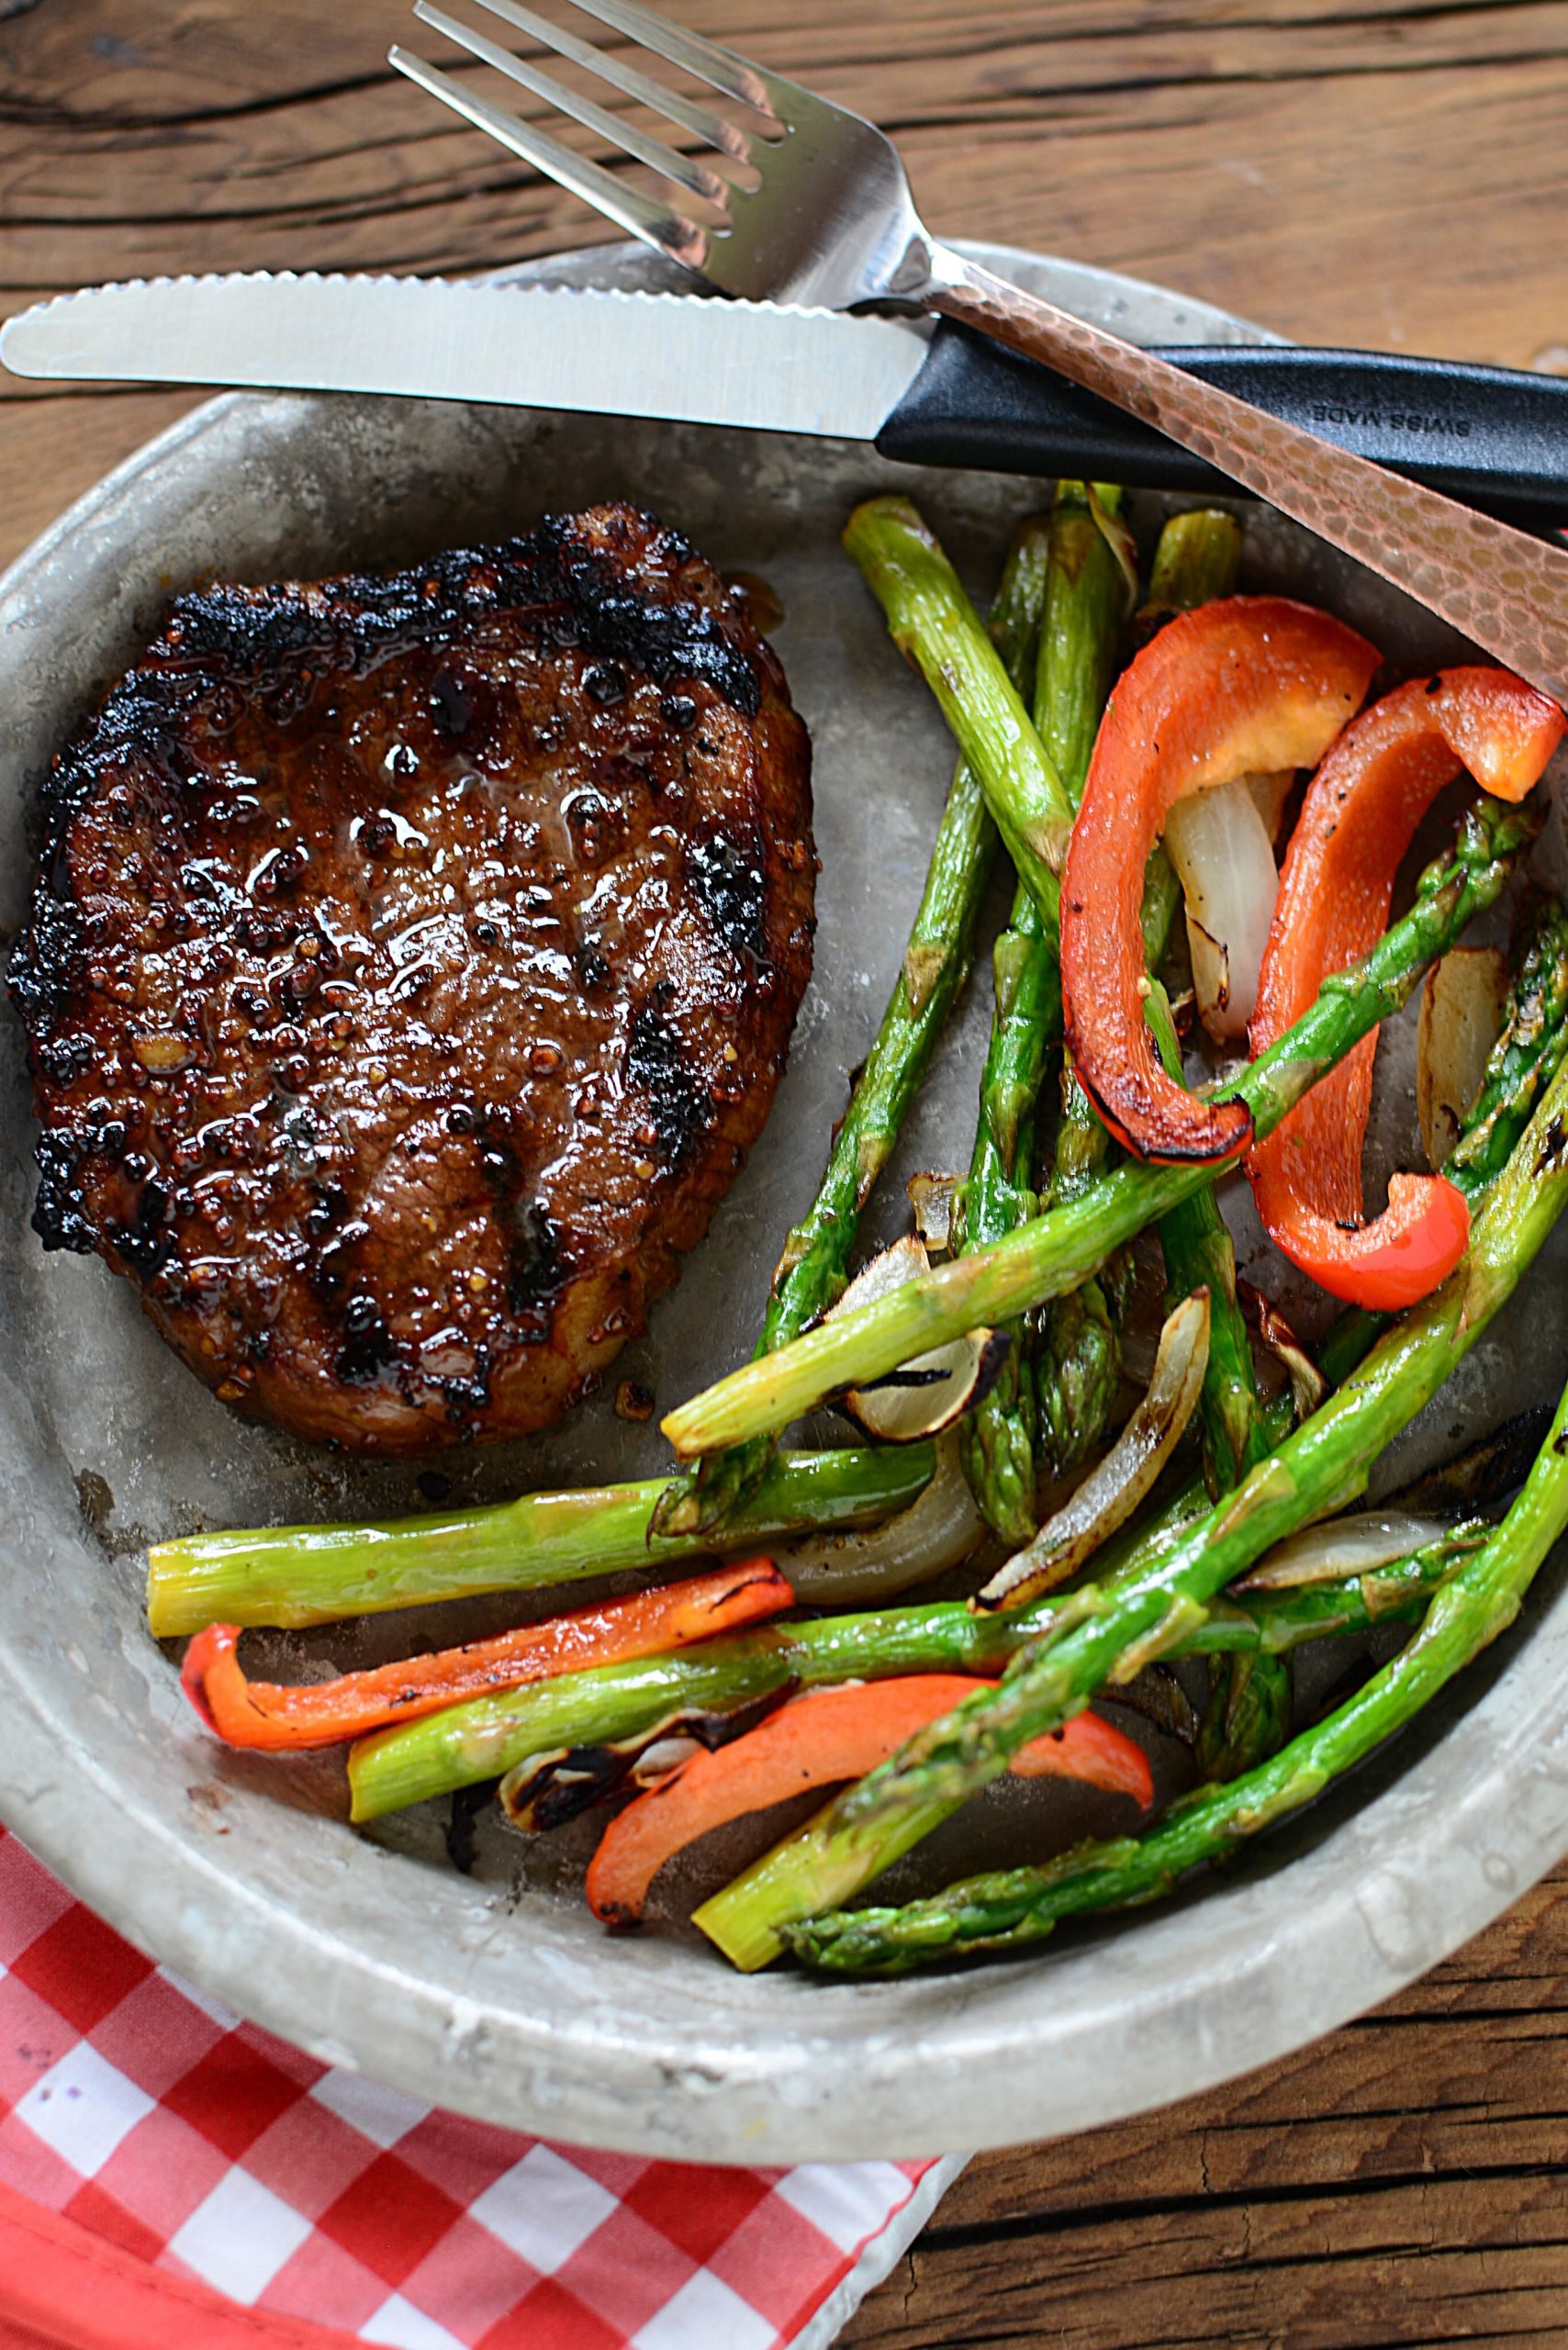 A grilled steak next to grilled vegetables.